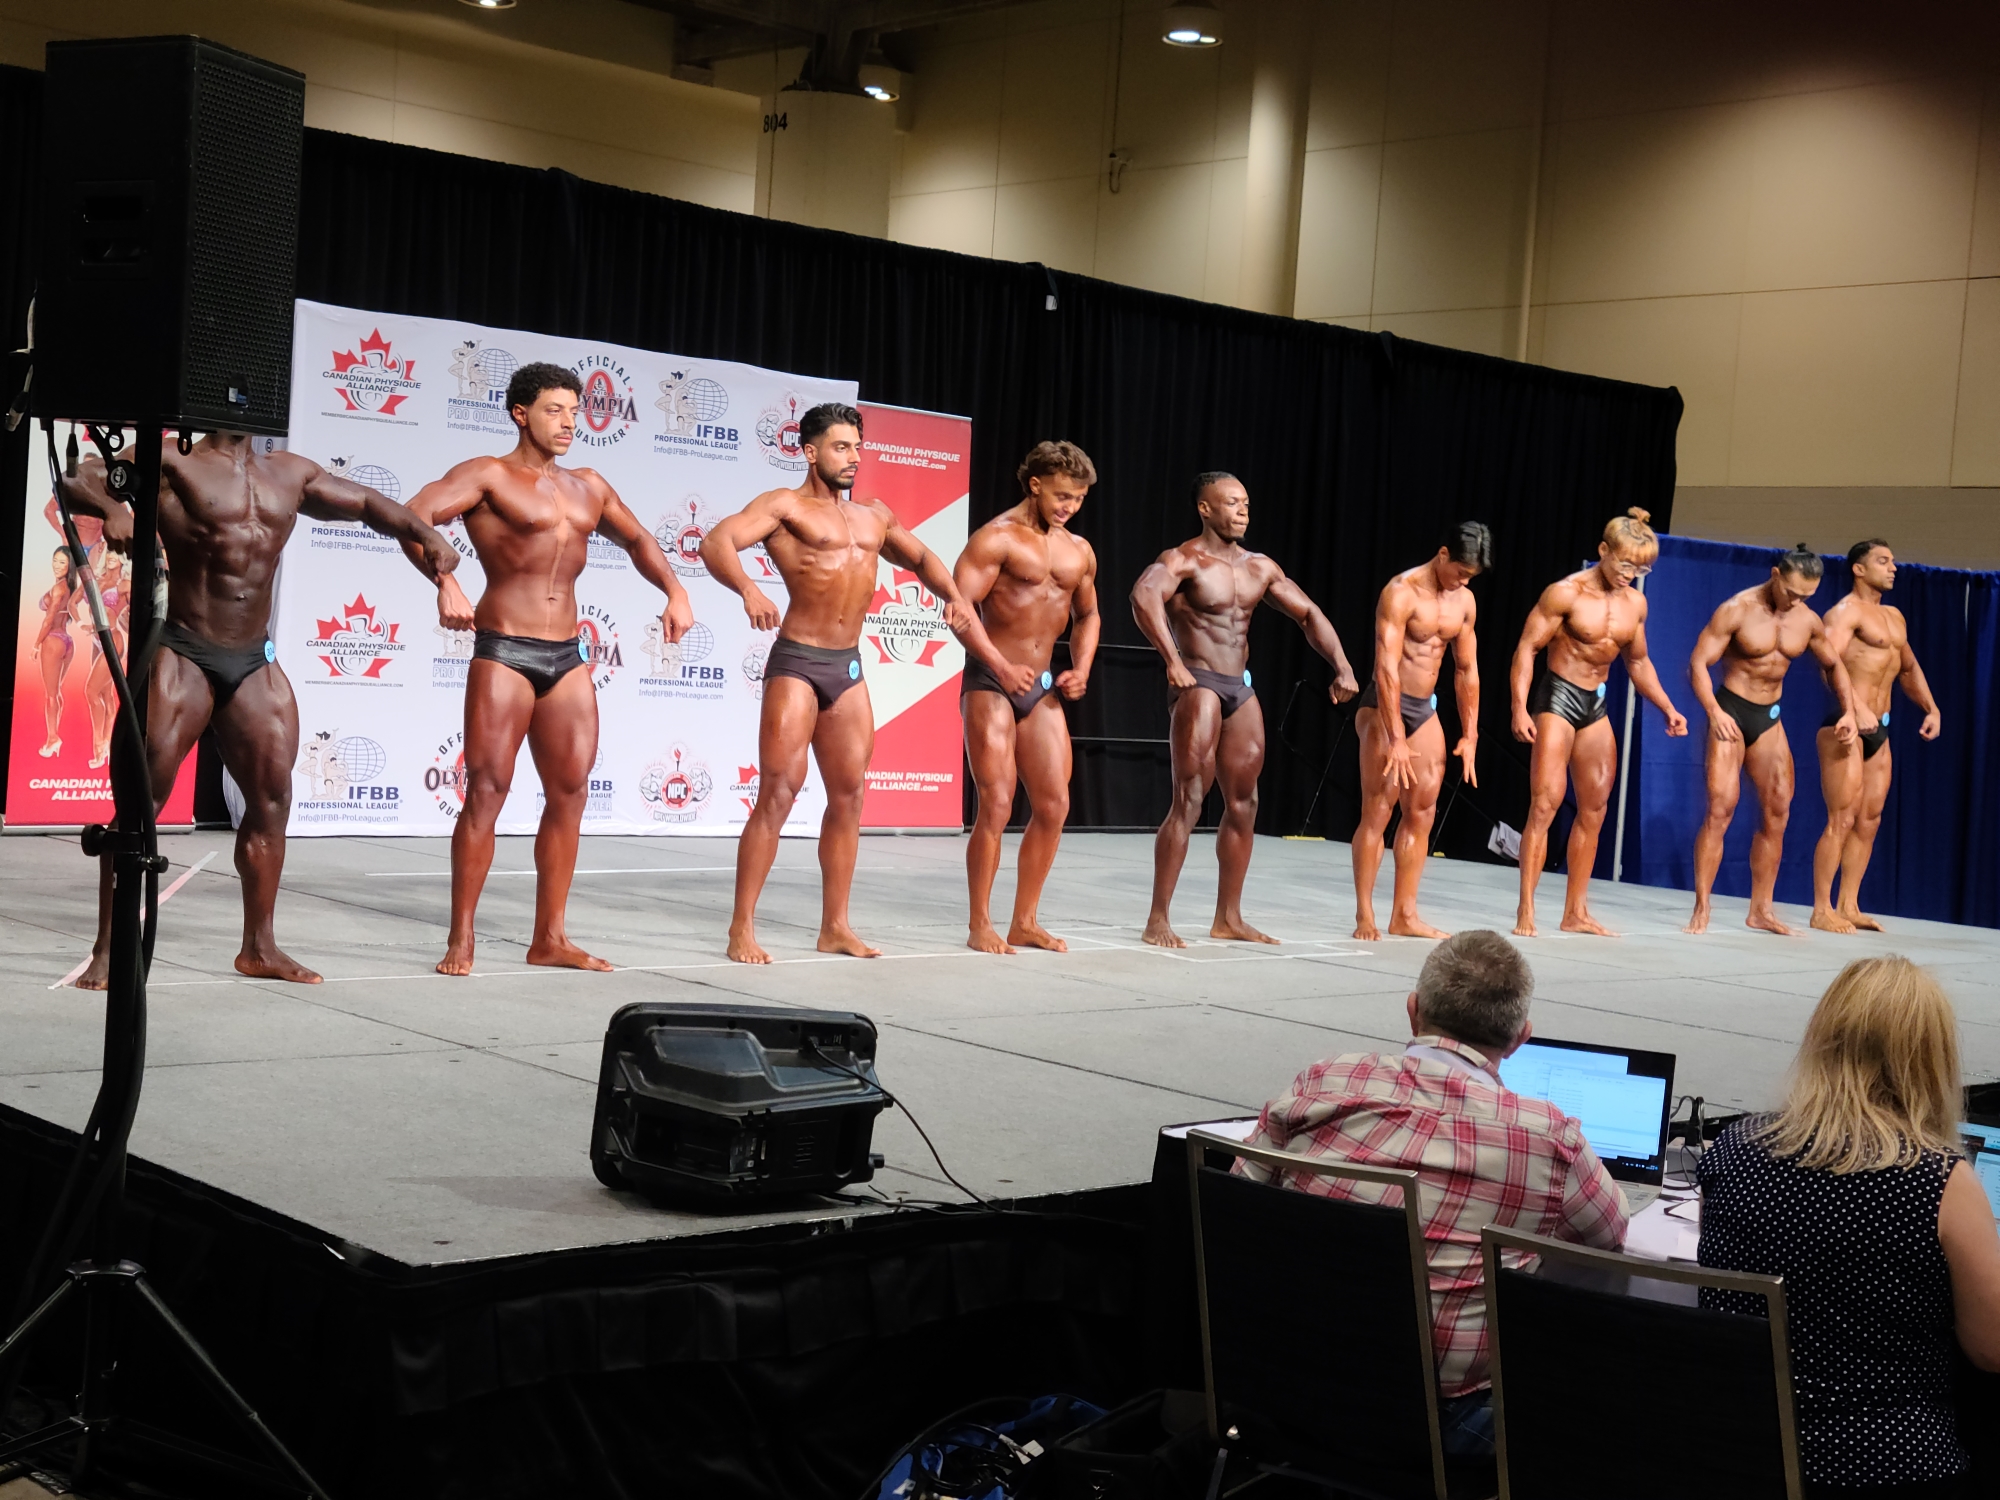 2023 Canfitpro natural championships - bodybuilders posing in bodybuilding competition